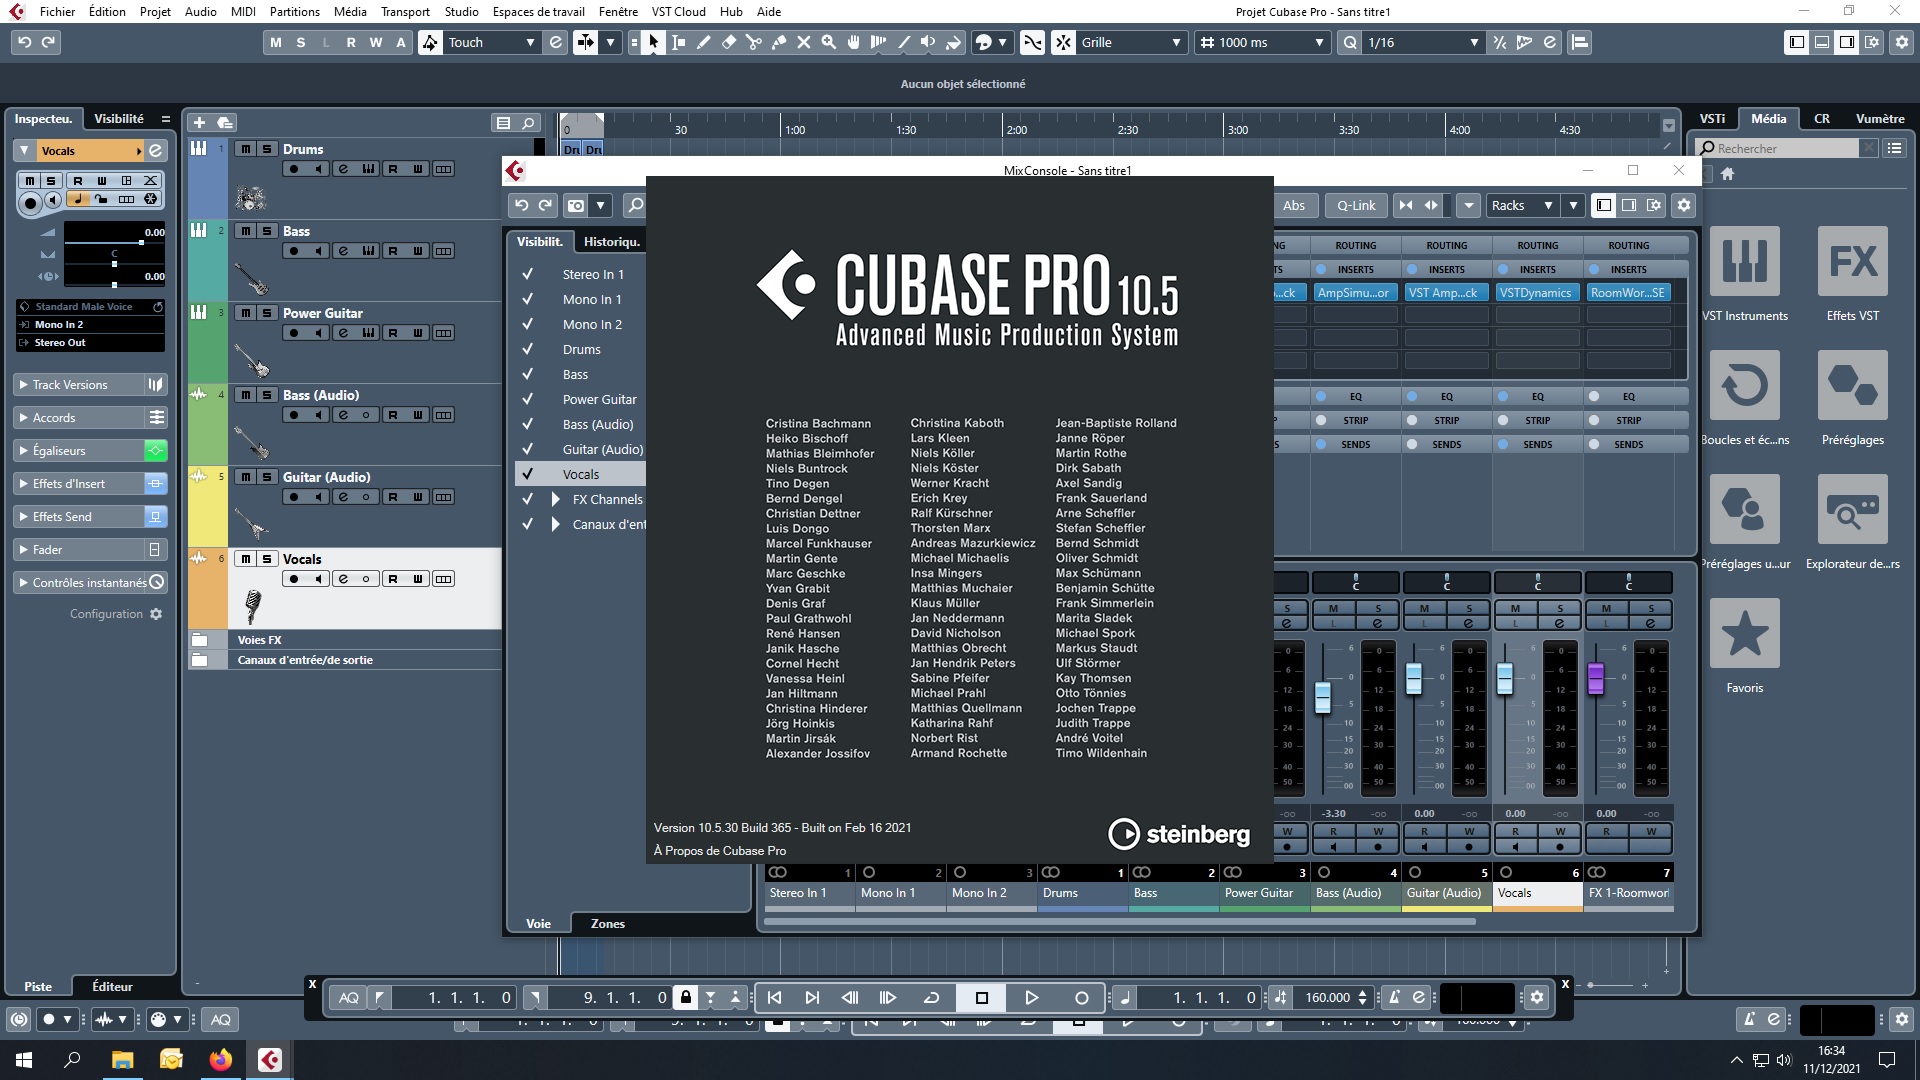 Pictures and images Steinberg Cubase Pro 10.5 - Audiofanzine